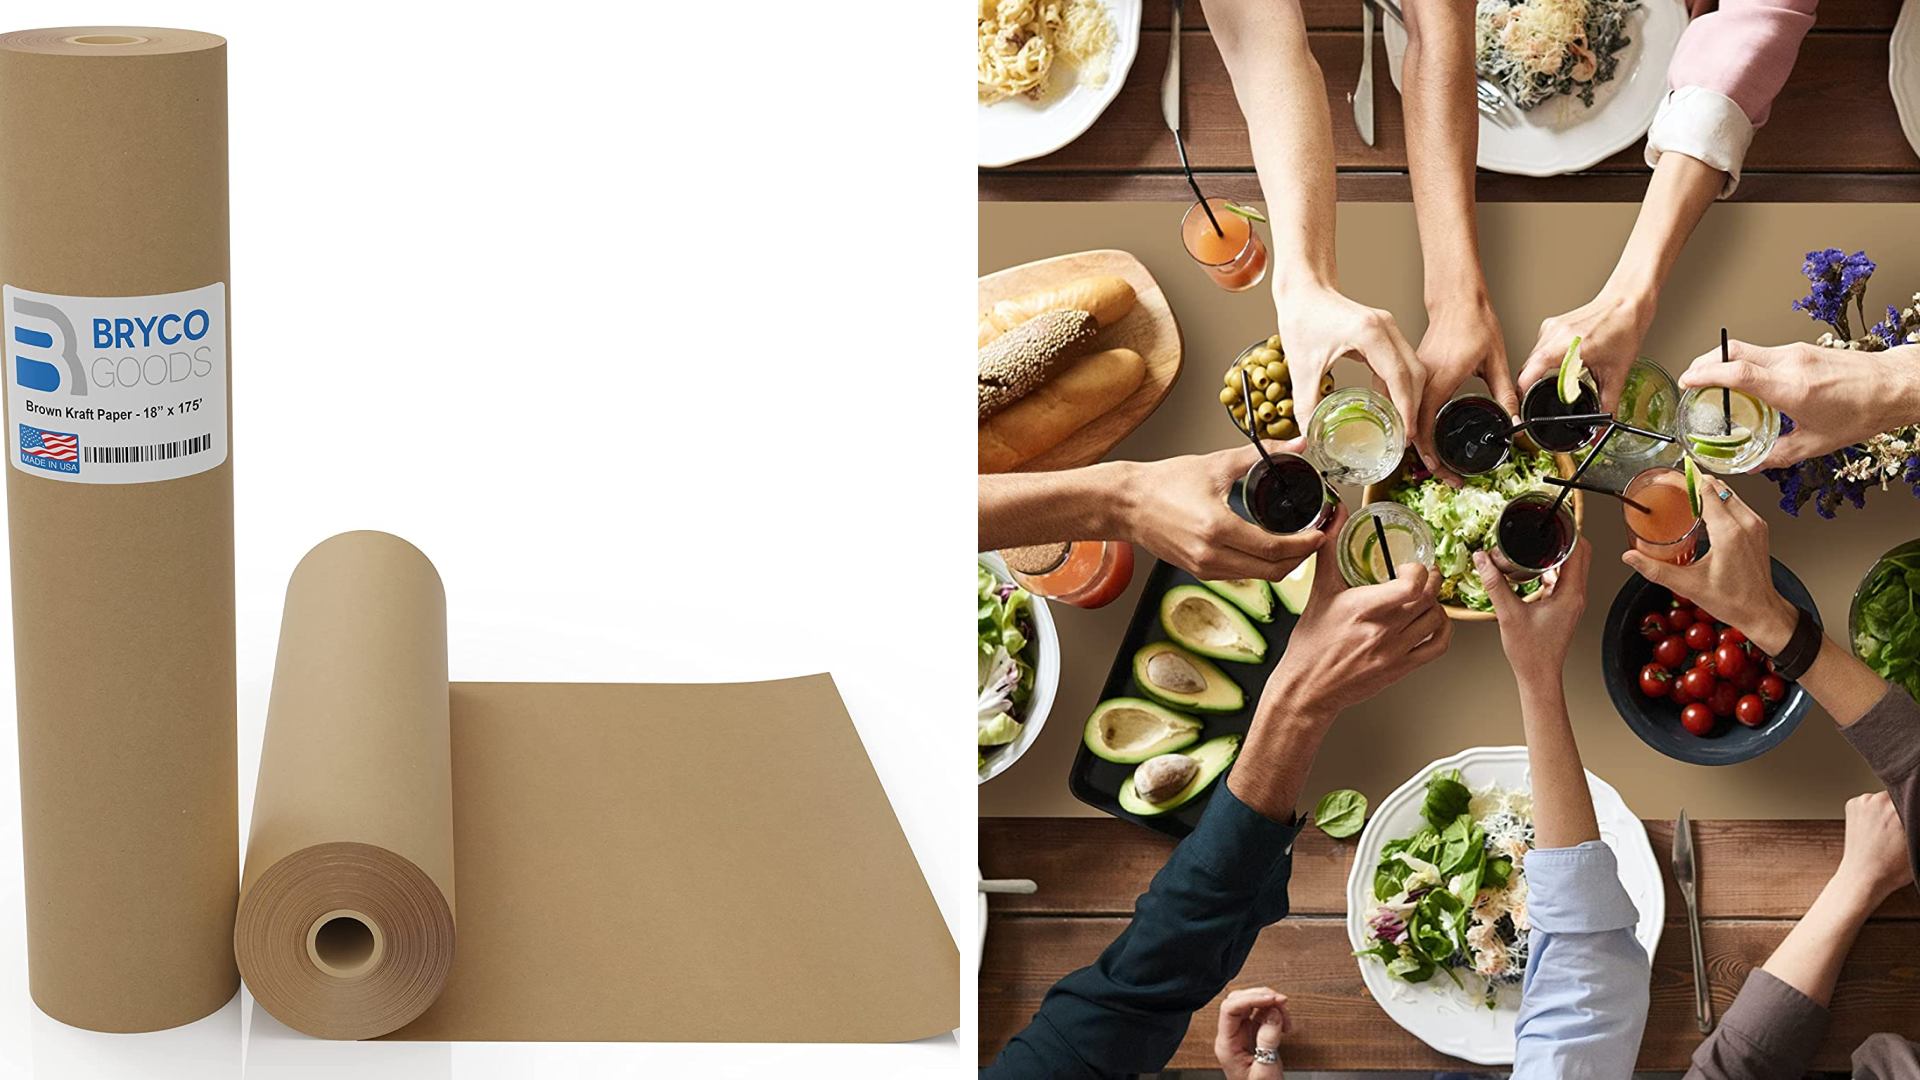  Bryco Goods Butcher Paper Roll - Butcher Table Paper